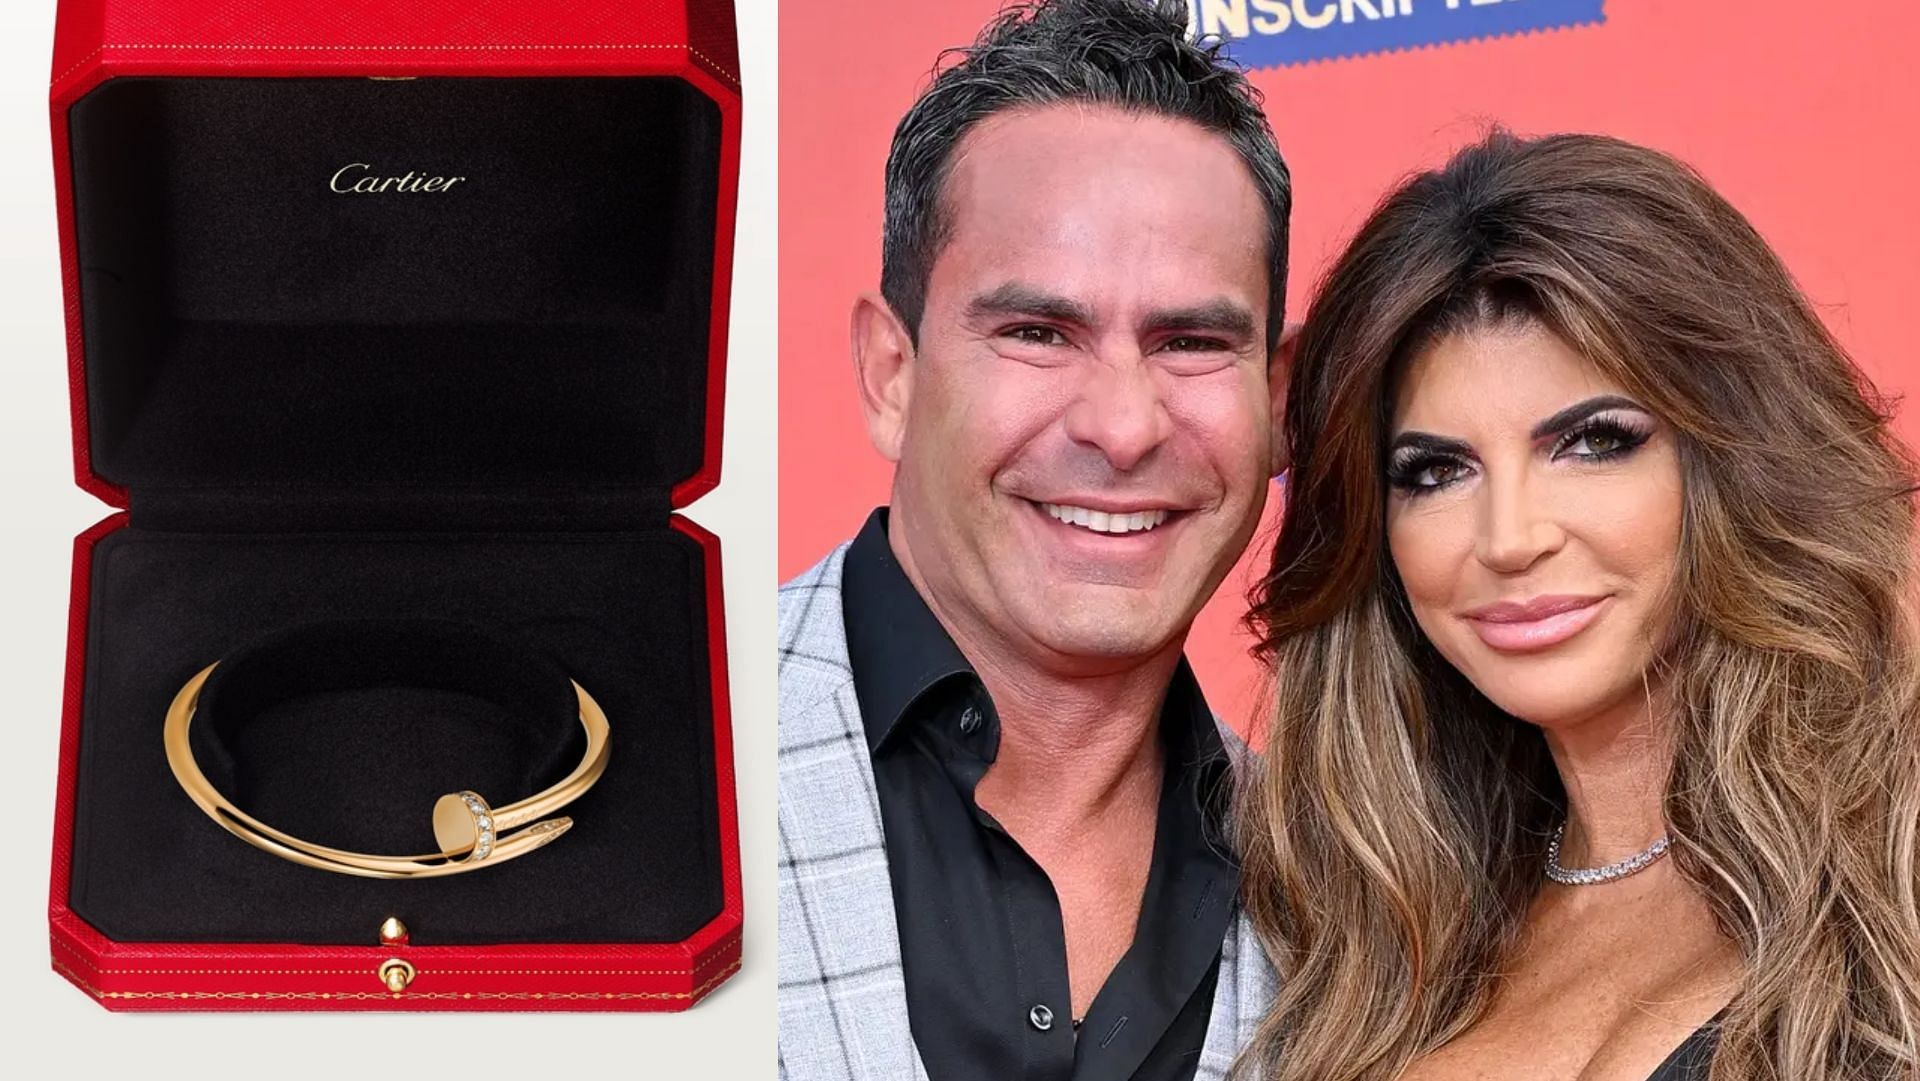 Luis Ruelas and Teresa Giudice tied the knot in August 2022. (Image via Cartier, Axelle/Bauer-Griffin/Getty)